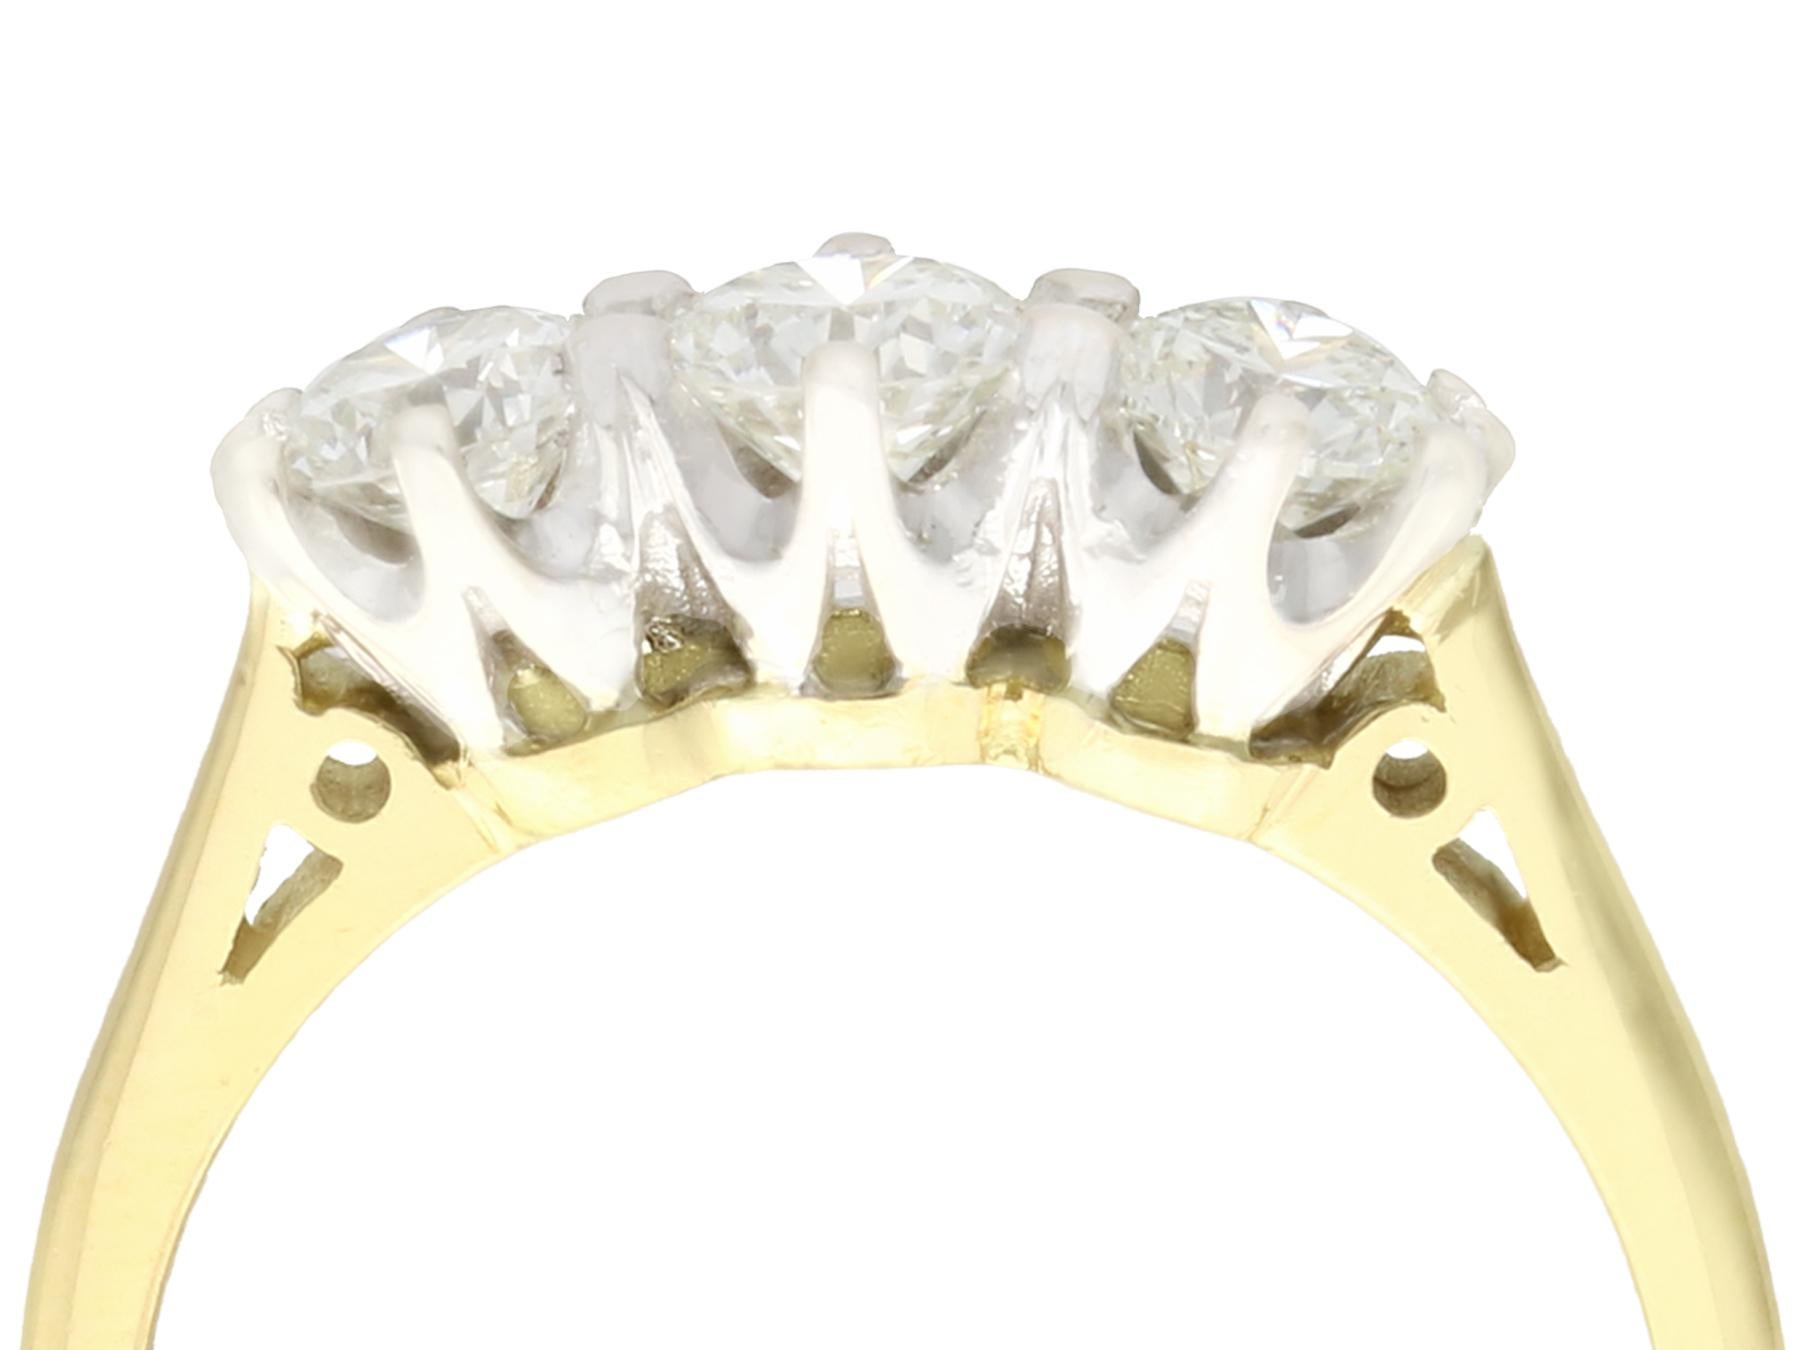 A fine and impressive vintage 0.87 carat diamond and 18 carat yellow gold, 18 karat white gold set trilogy ring; part of our diverse antique jewelry and estate jewelry collections

This fine and impressive vintage trilogy ring has been crafted in